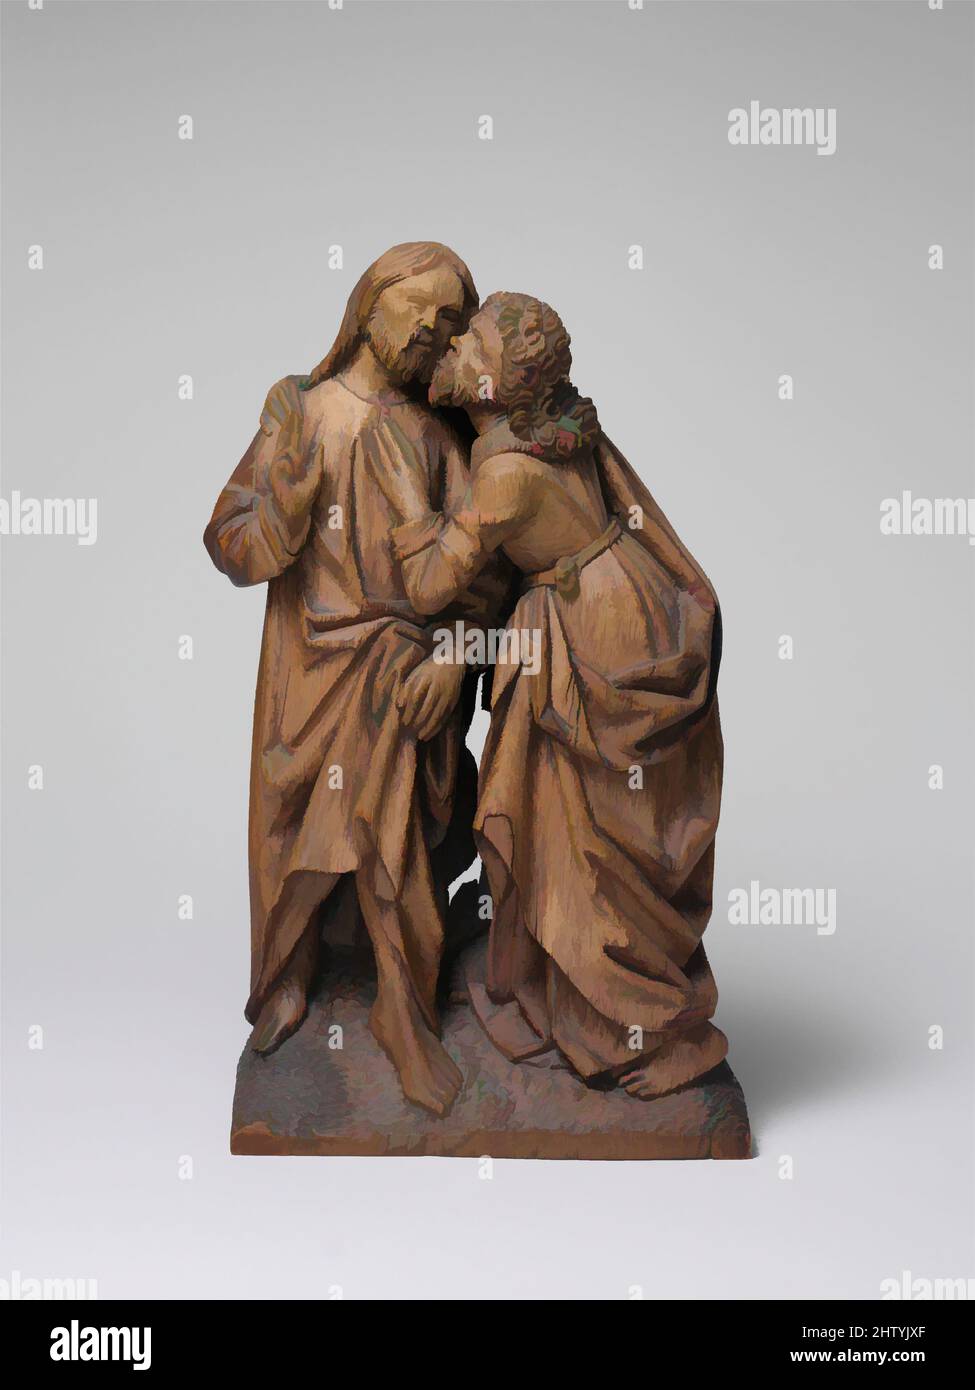 Art inspired by The Kiss of Judas, 16th century, Made in Lower Rhine, Germany, German, Oak, Overall: 10 5/16 x 6 1/4 x 2 9/16 in. (26.2 x 15.8 x 6.5 cm), Sculpture-Miniature-Wood, Classic works modernized by Artotop with a splash of modernity. Shapes, color and value, eye-catching visual impact on art. Emotions through freedom of artworks in a contemporary way. A timeless message pursuing a wildly creative new direction. Artists turning to the digital medium and creating the Artotop NFT Stock Photo